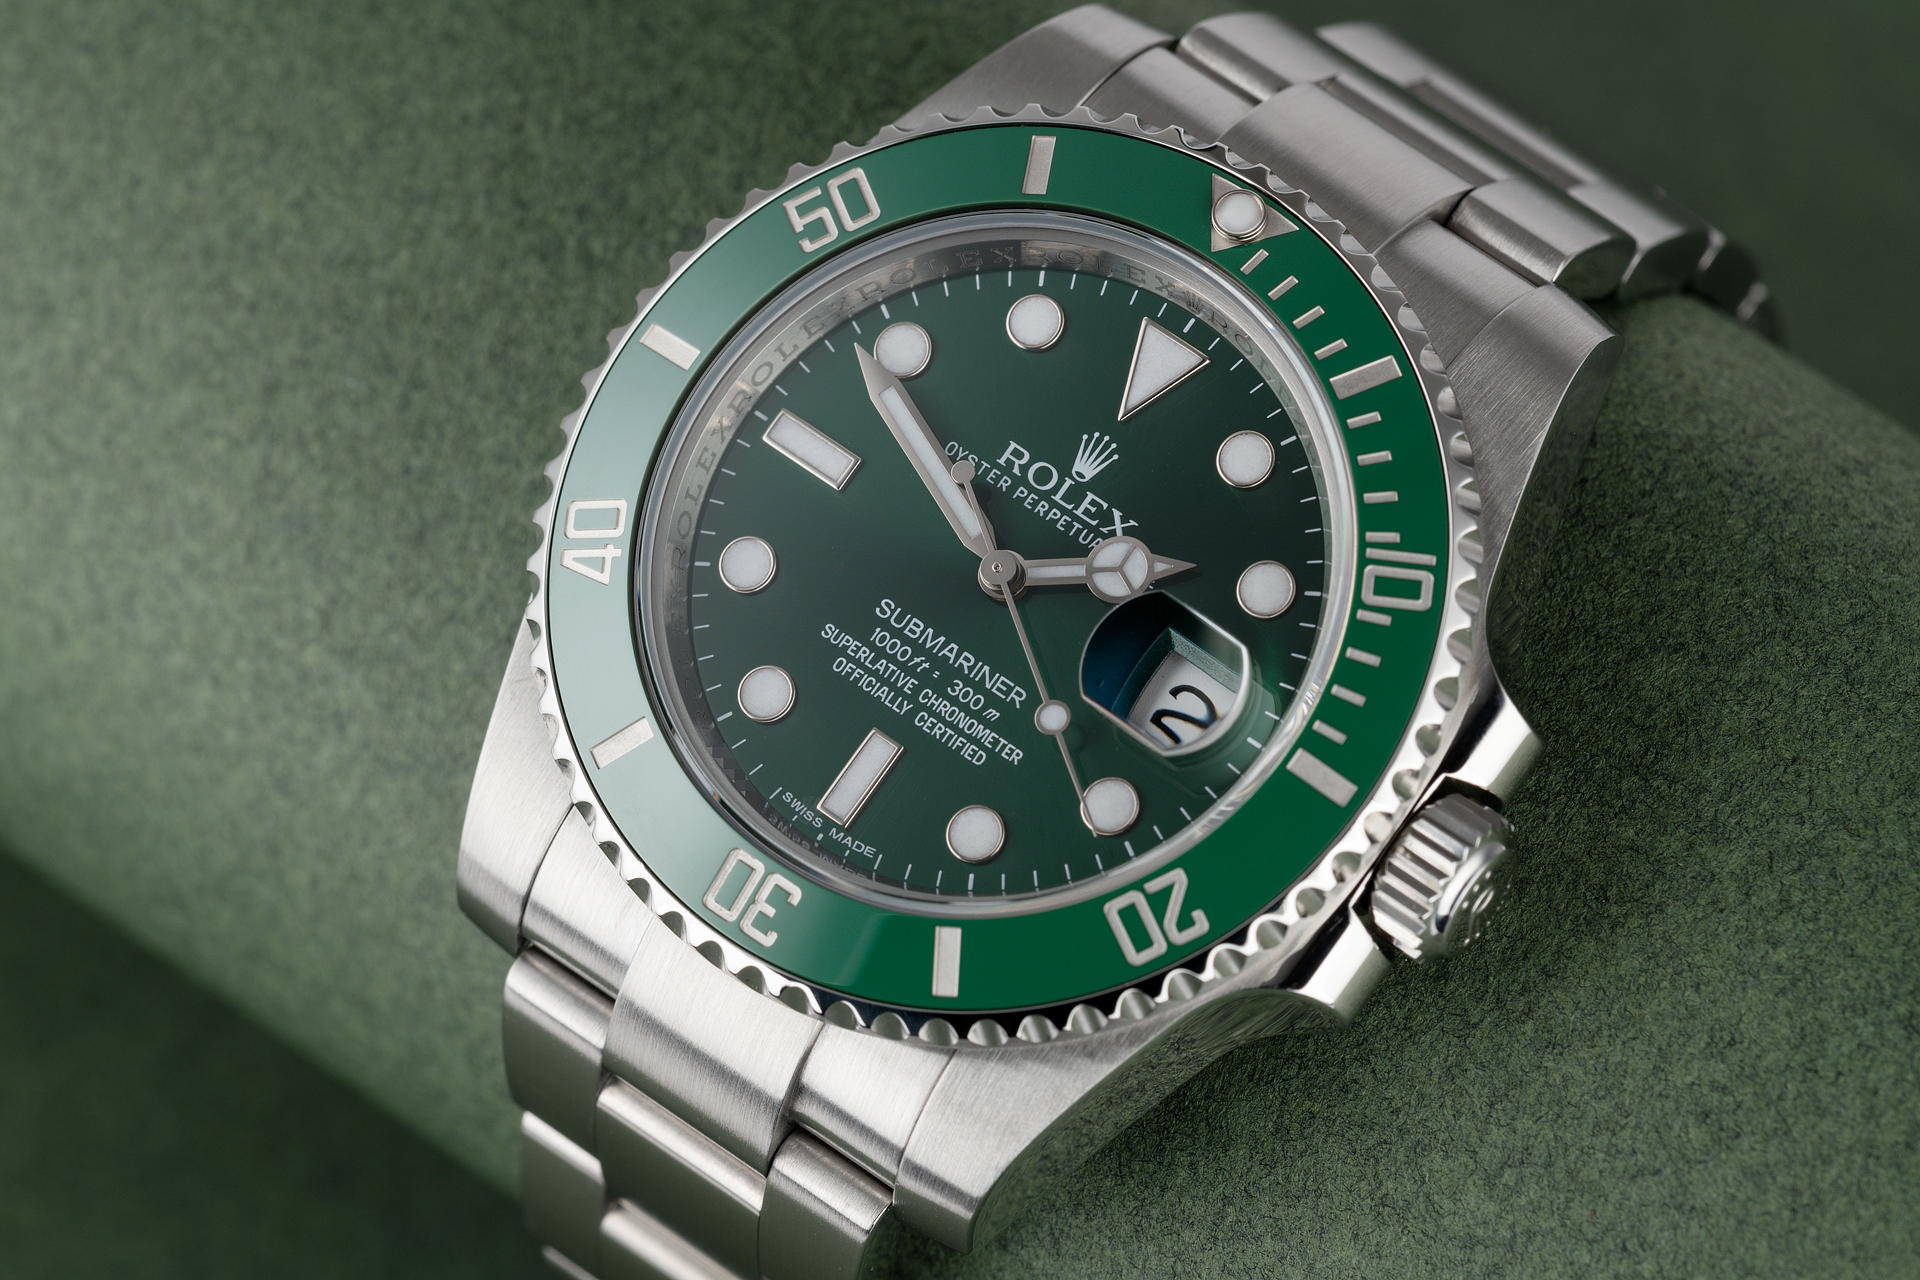 Rolex submariner Hulk 2013 116610LV with Box and Papers MINT condition